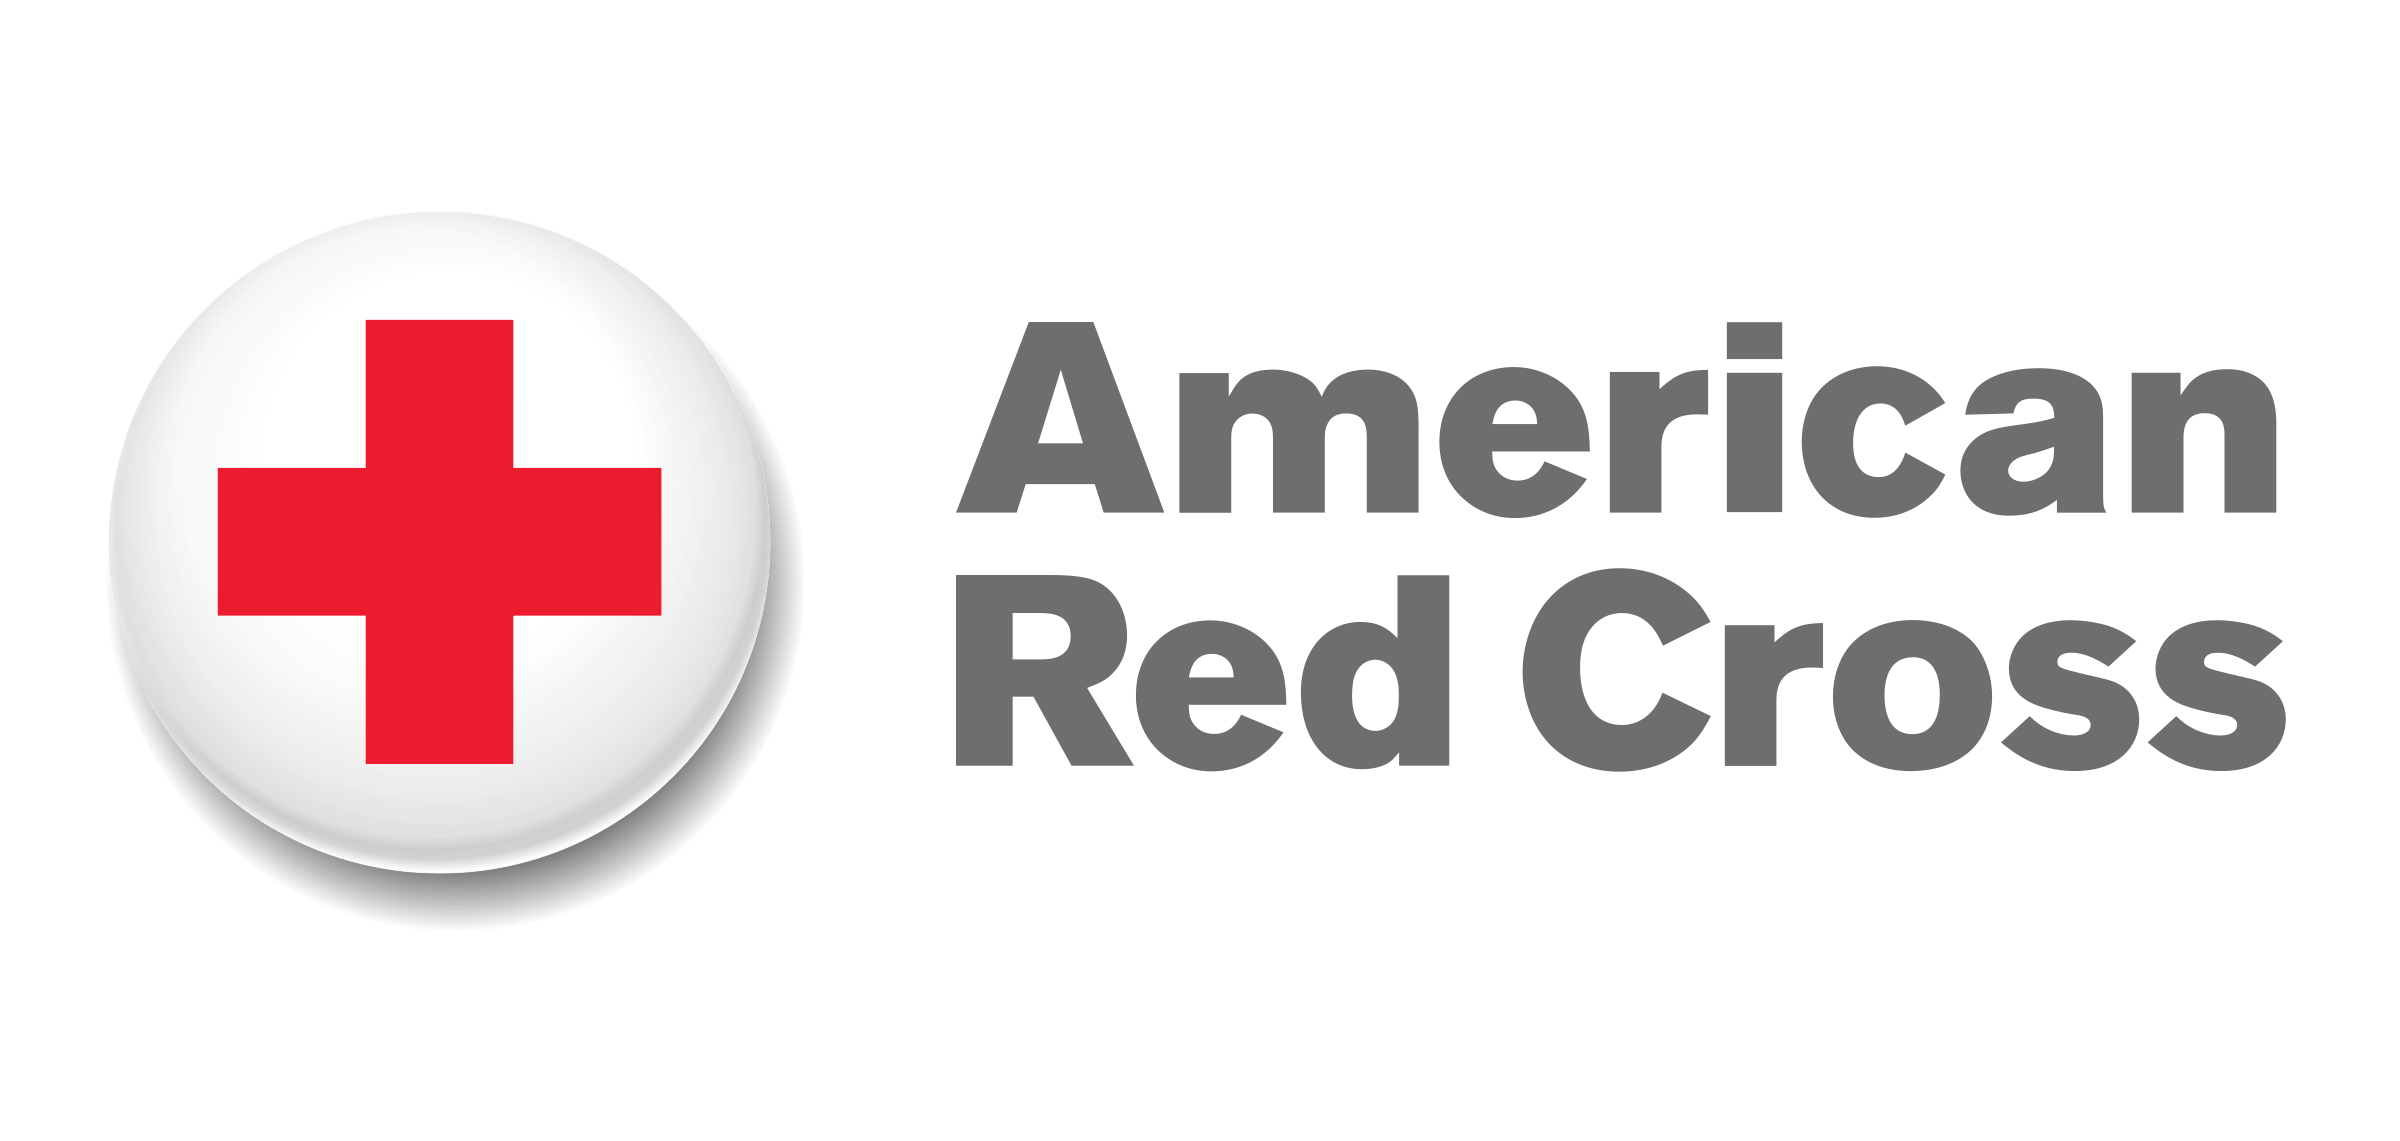 Big Picture of American Red Cross Logo - American Red Cross Logo PNG Transparent & SVG Vector - Freebie Supply